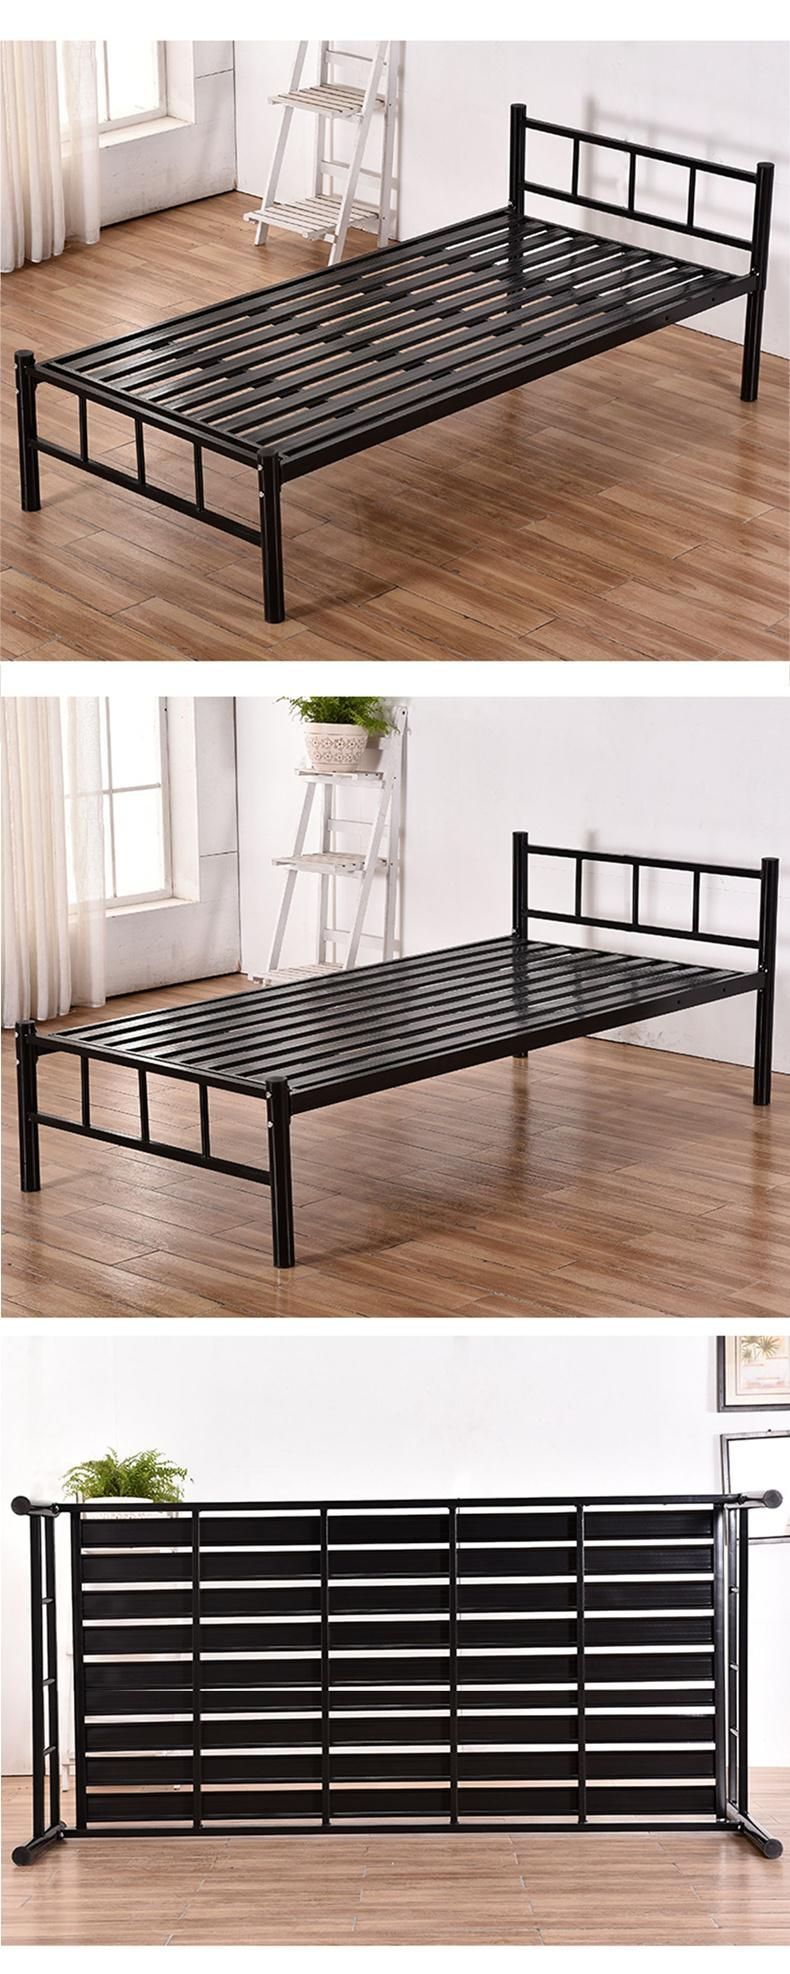 Bedroom Furniture Iron Bunk Beds Steel Double Beds for Adults